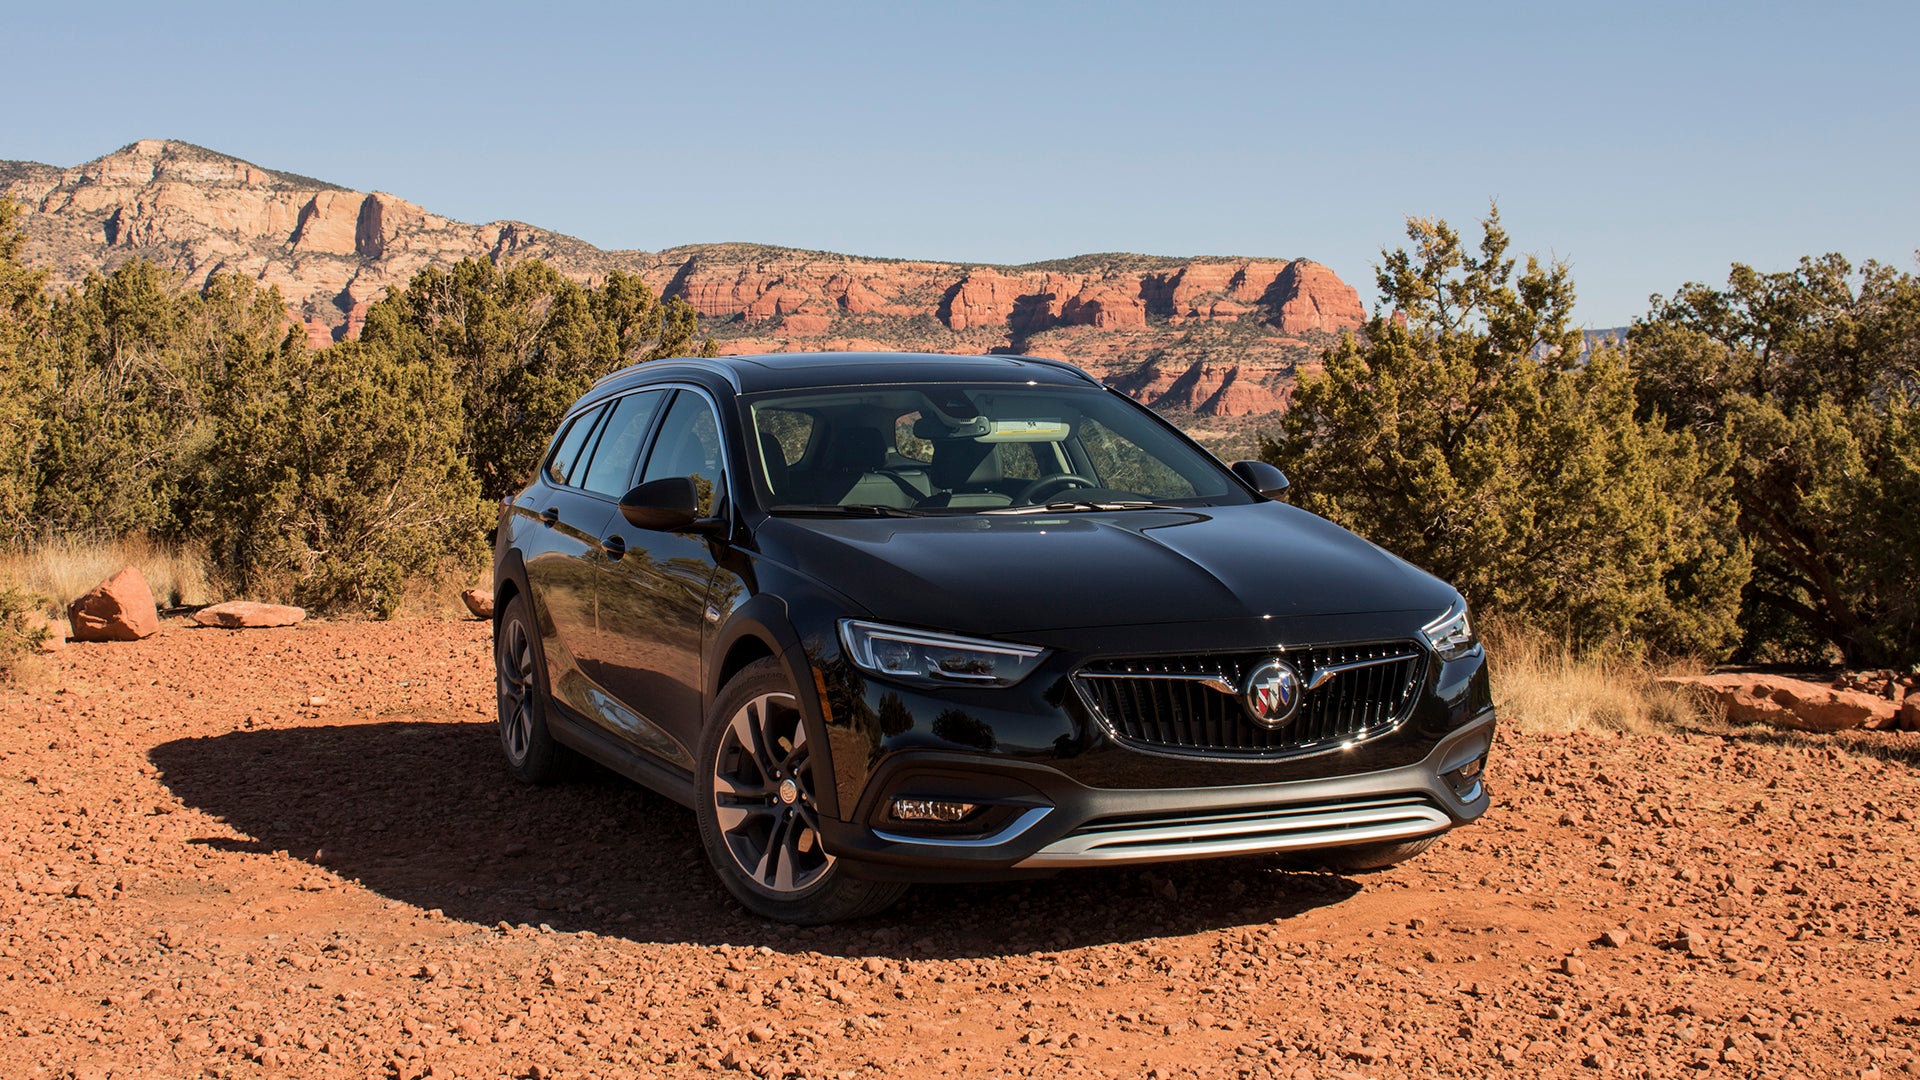 The Way We Were: The 2018 Buick Regal TourX Calls Back to the Golden Age of Station Wagons